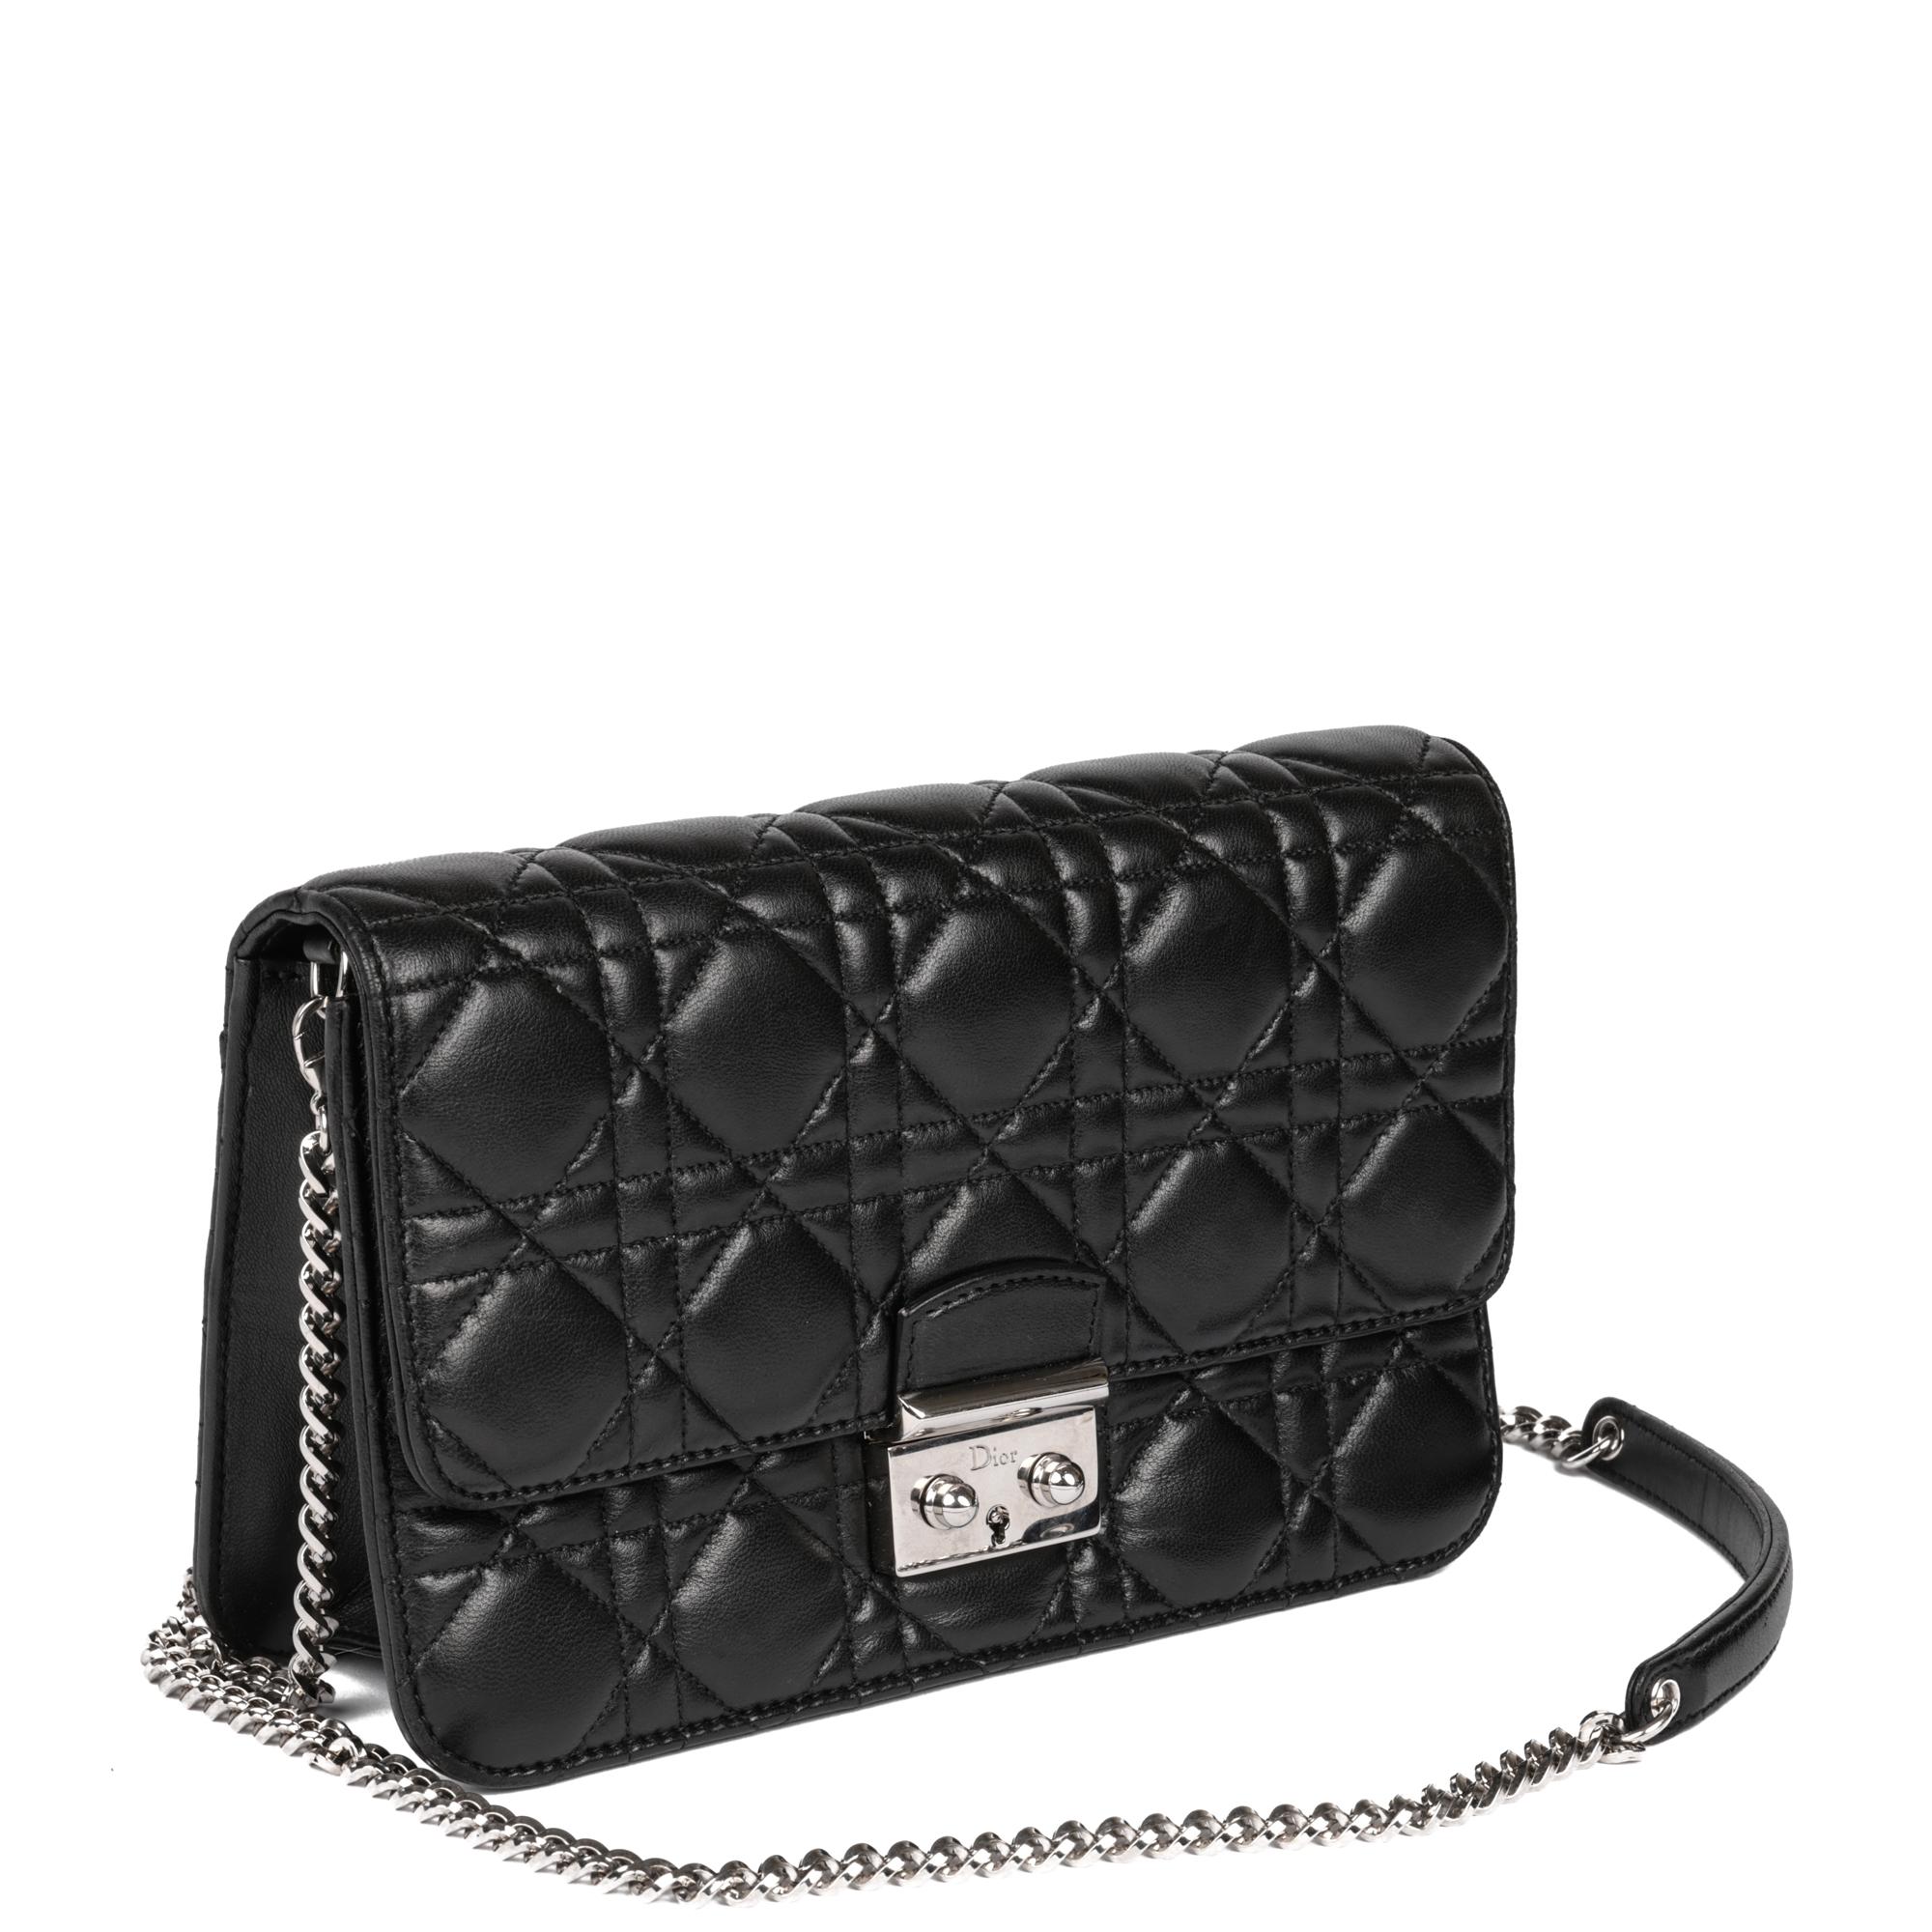 CHRISTIAN DIOR
Black Quilted Lambskin Miss Dior Flap Bag

Xupes Reference: CB867
Serial Number: 09-BO-1115
Age (Circa): 2015
Accompanied By: Authenticity Card
Authenticity Details: Authenticity Card (Made in Italy)
Gender: Ladies
Type: Shoulder,